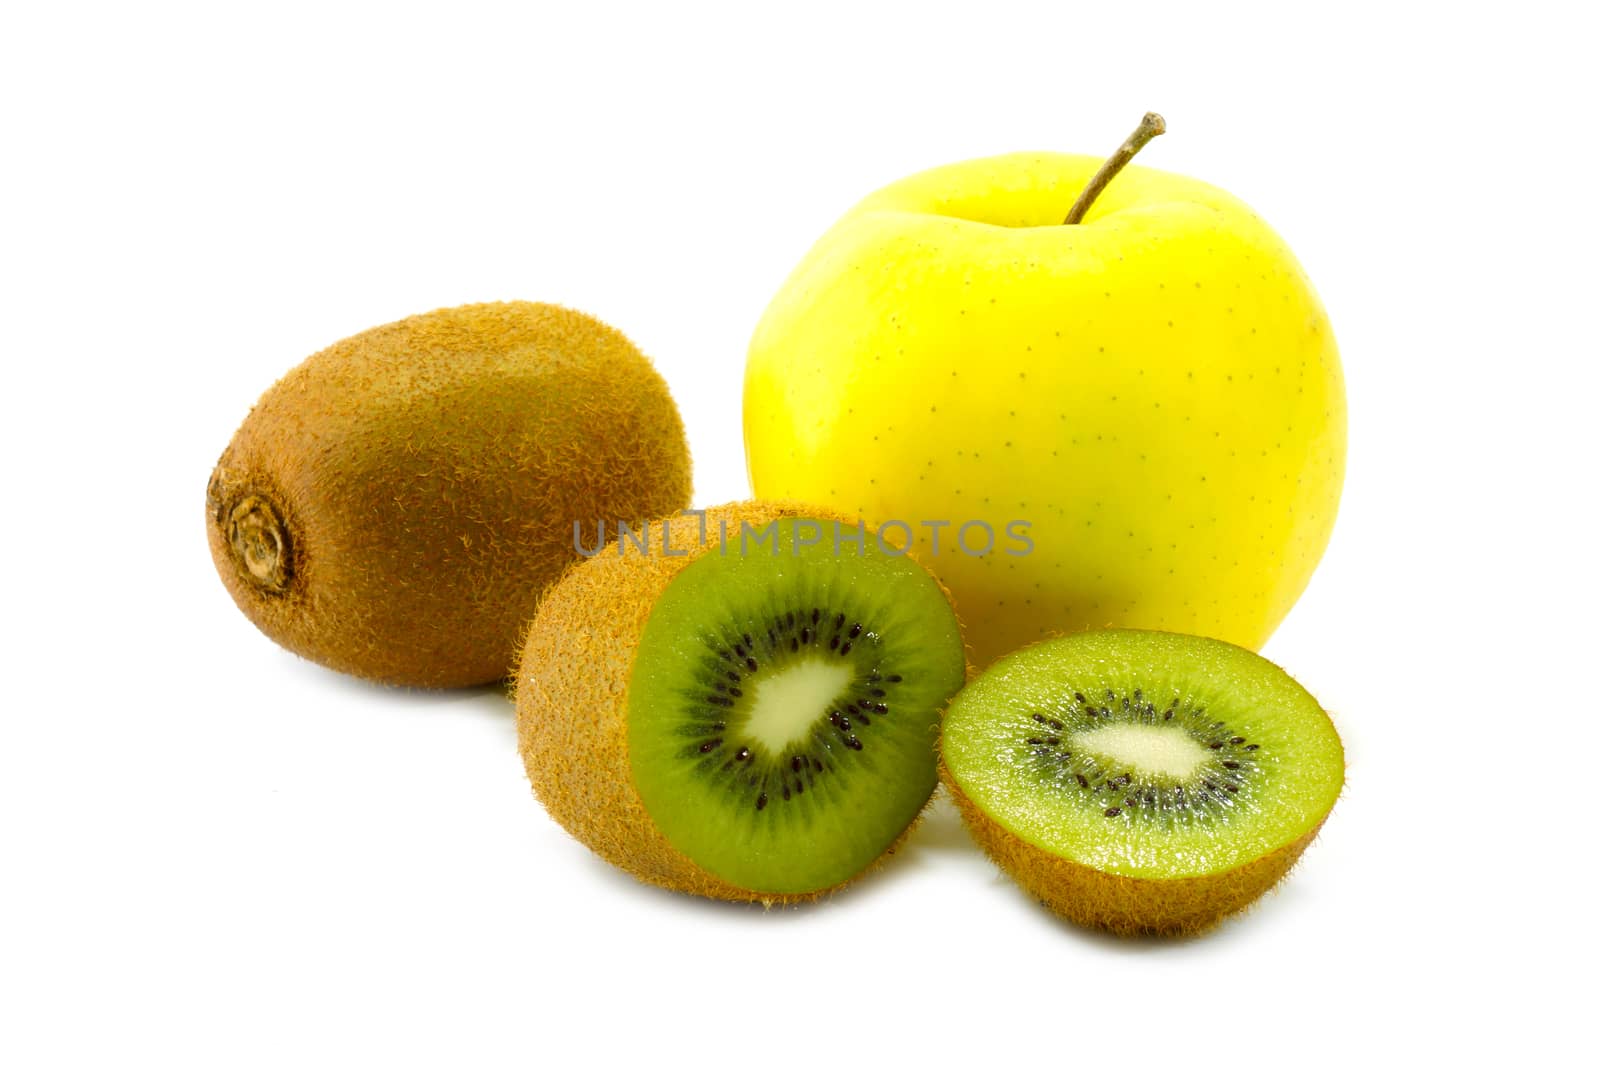 kiwi fruit and yellow apple isolated on white background by Noppharat_th